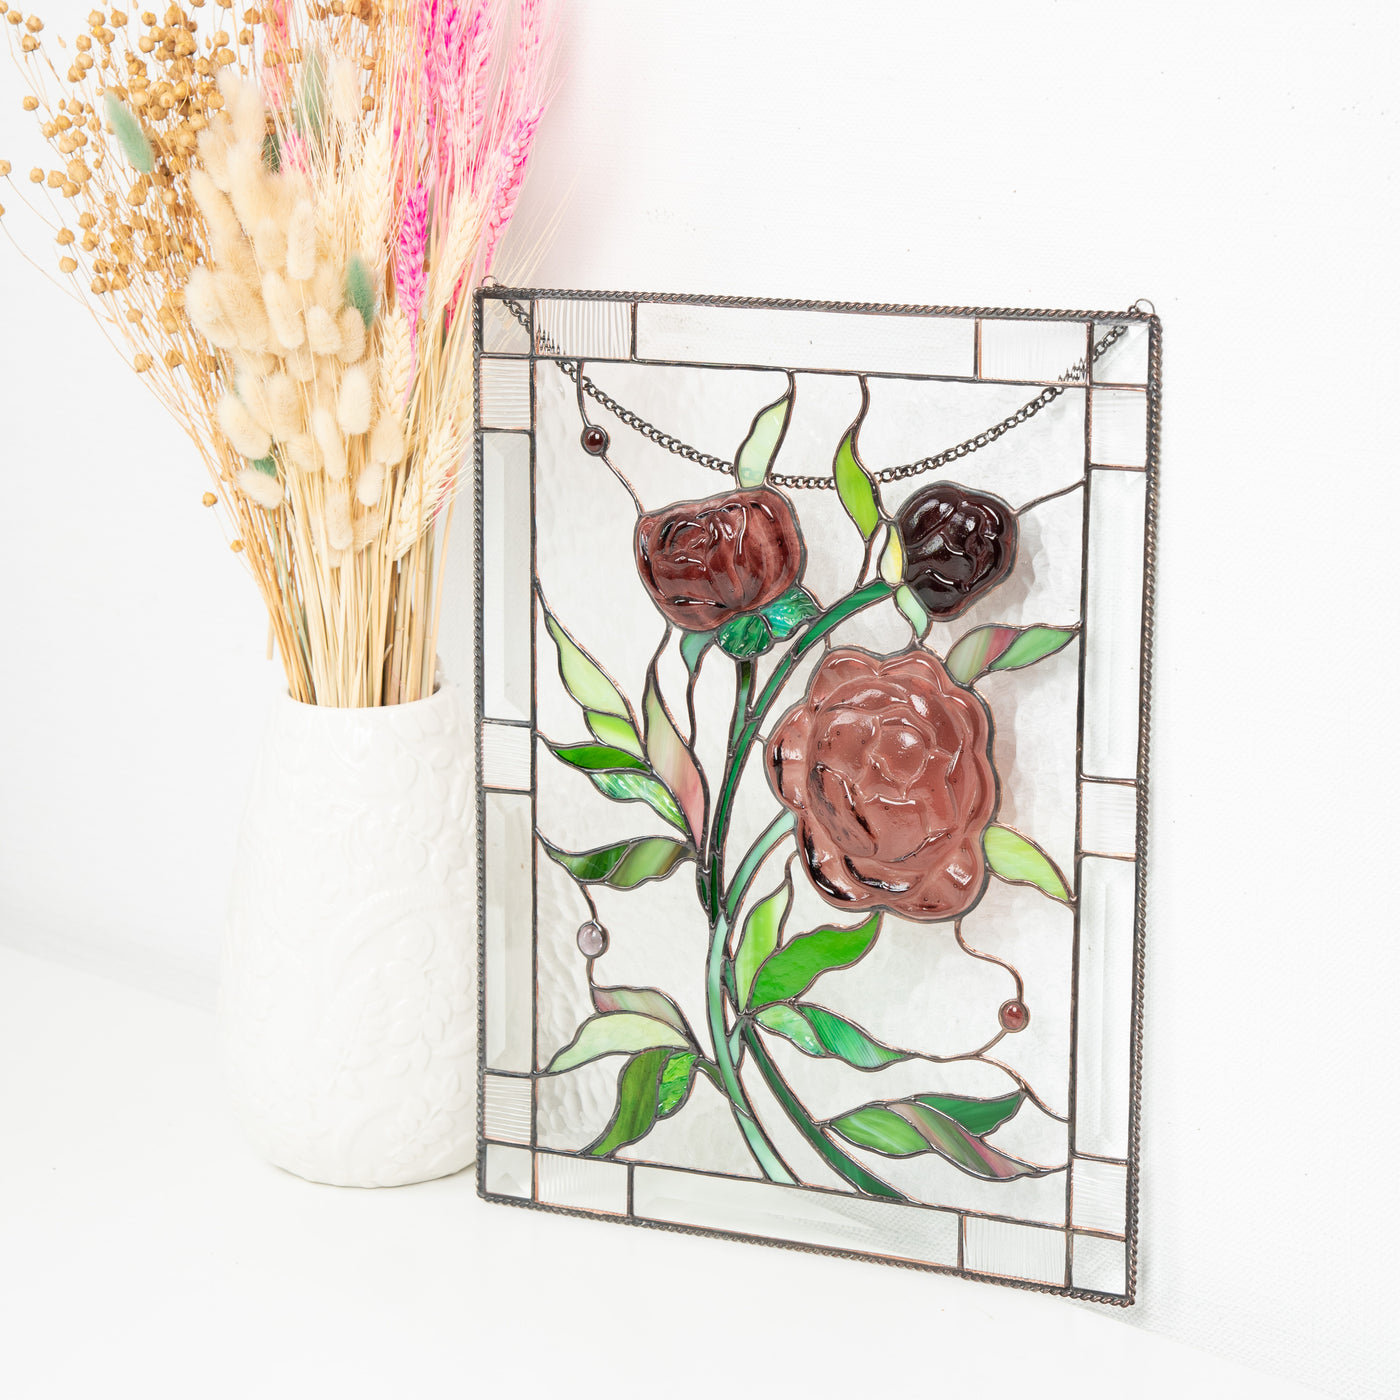 Window hanging of fused stained glass depicting peonies